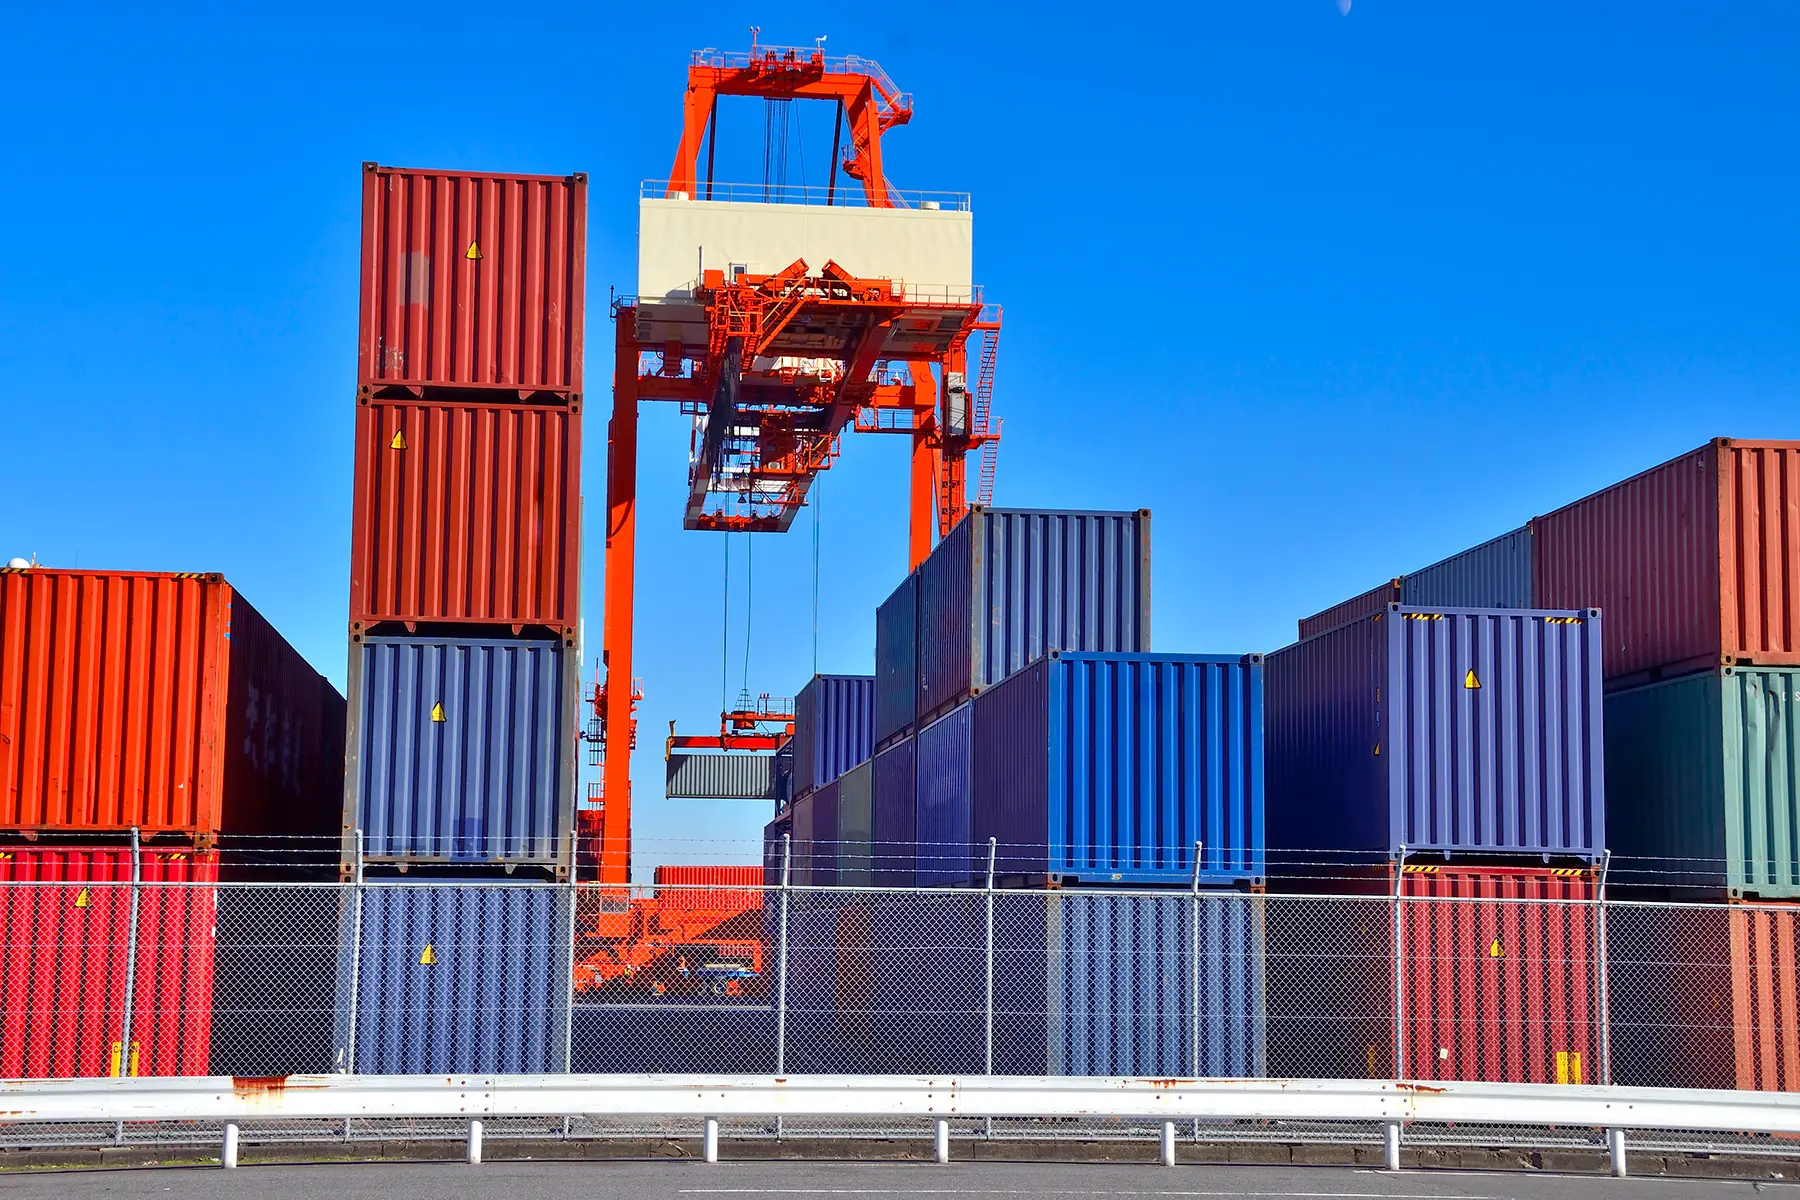 Red and blue shipping containers at a port on a sunny day